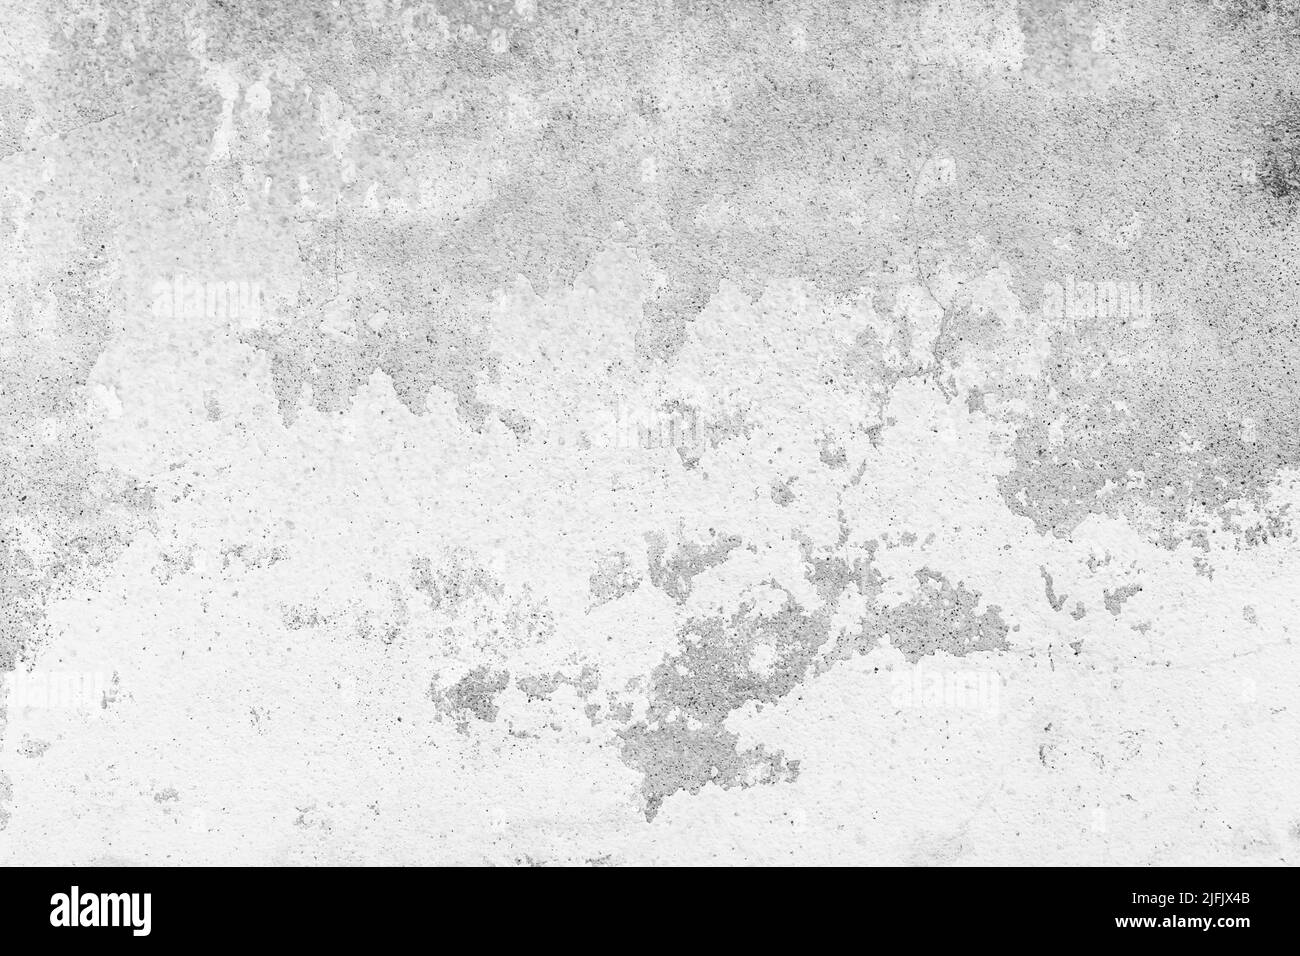 Vintage or grungy white background of natural cement or stone old texture as a retro pattern wall. It is a concept, conceptual or metaphor wall banner Stock Photo